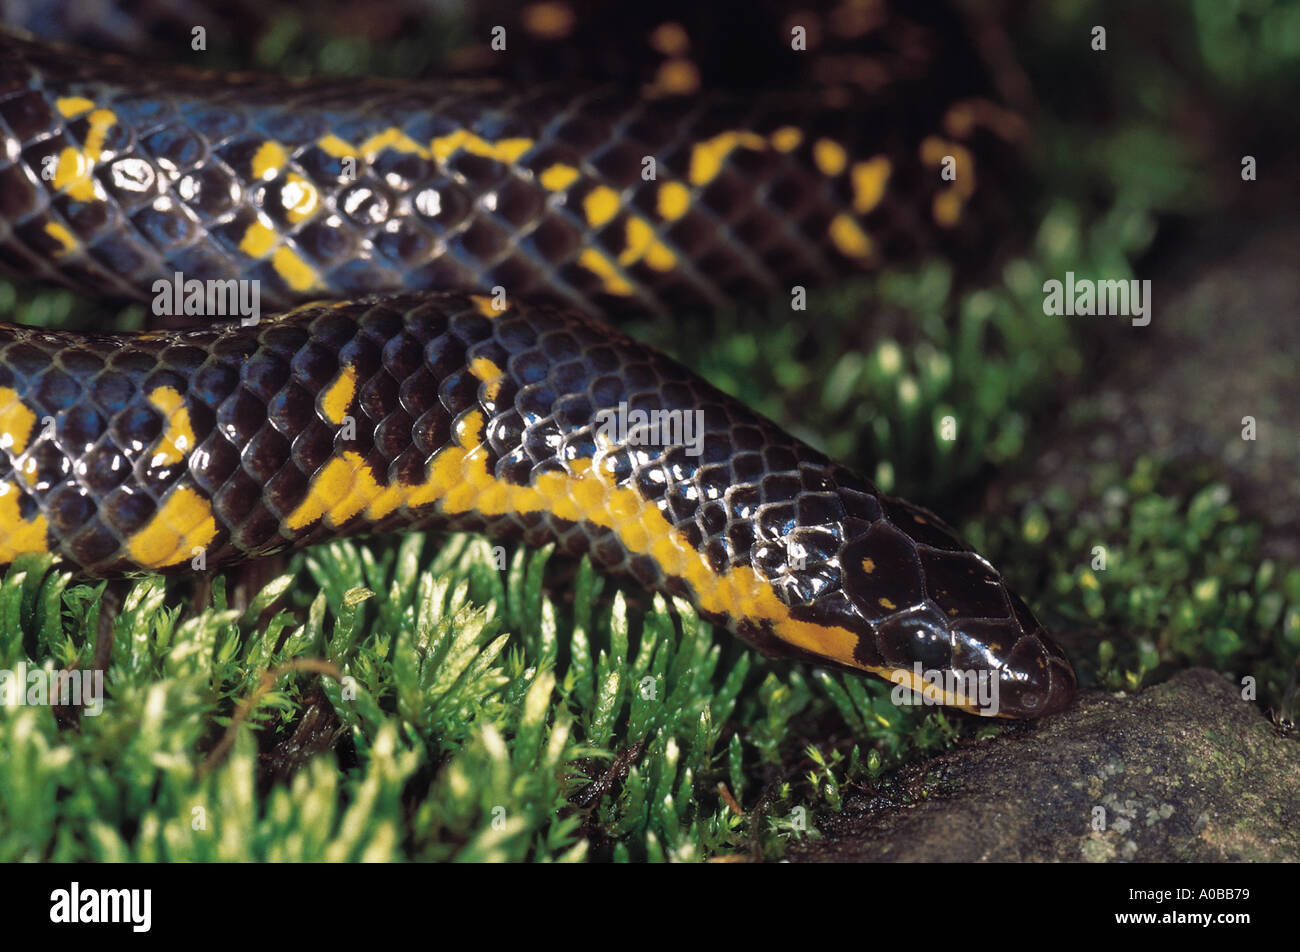 Uropeltis Macrolepis Shieldtail snake The head of this snake is adapted for burrowing Non venomous Maharashtra India Stock Photo